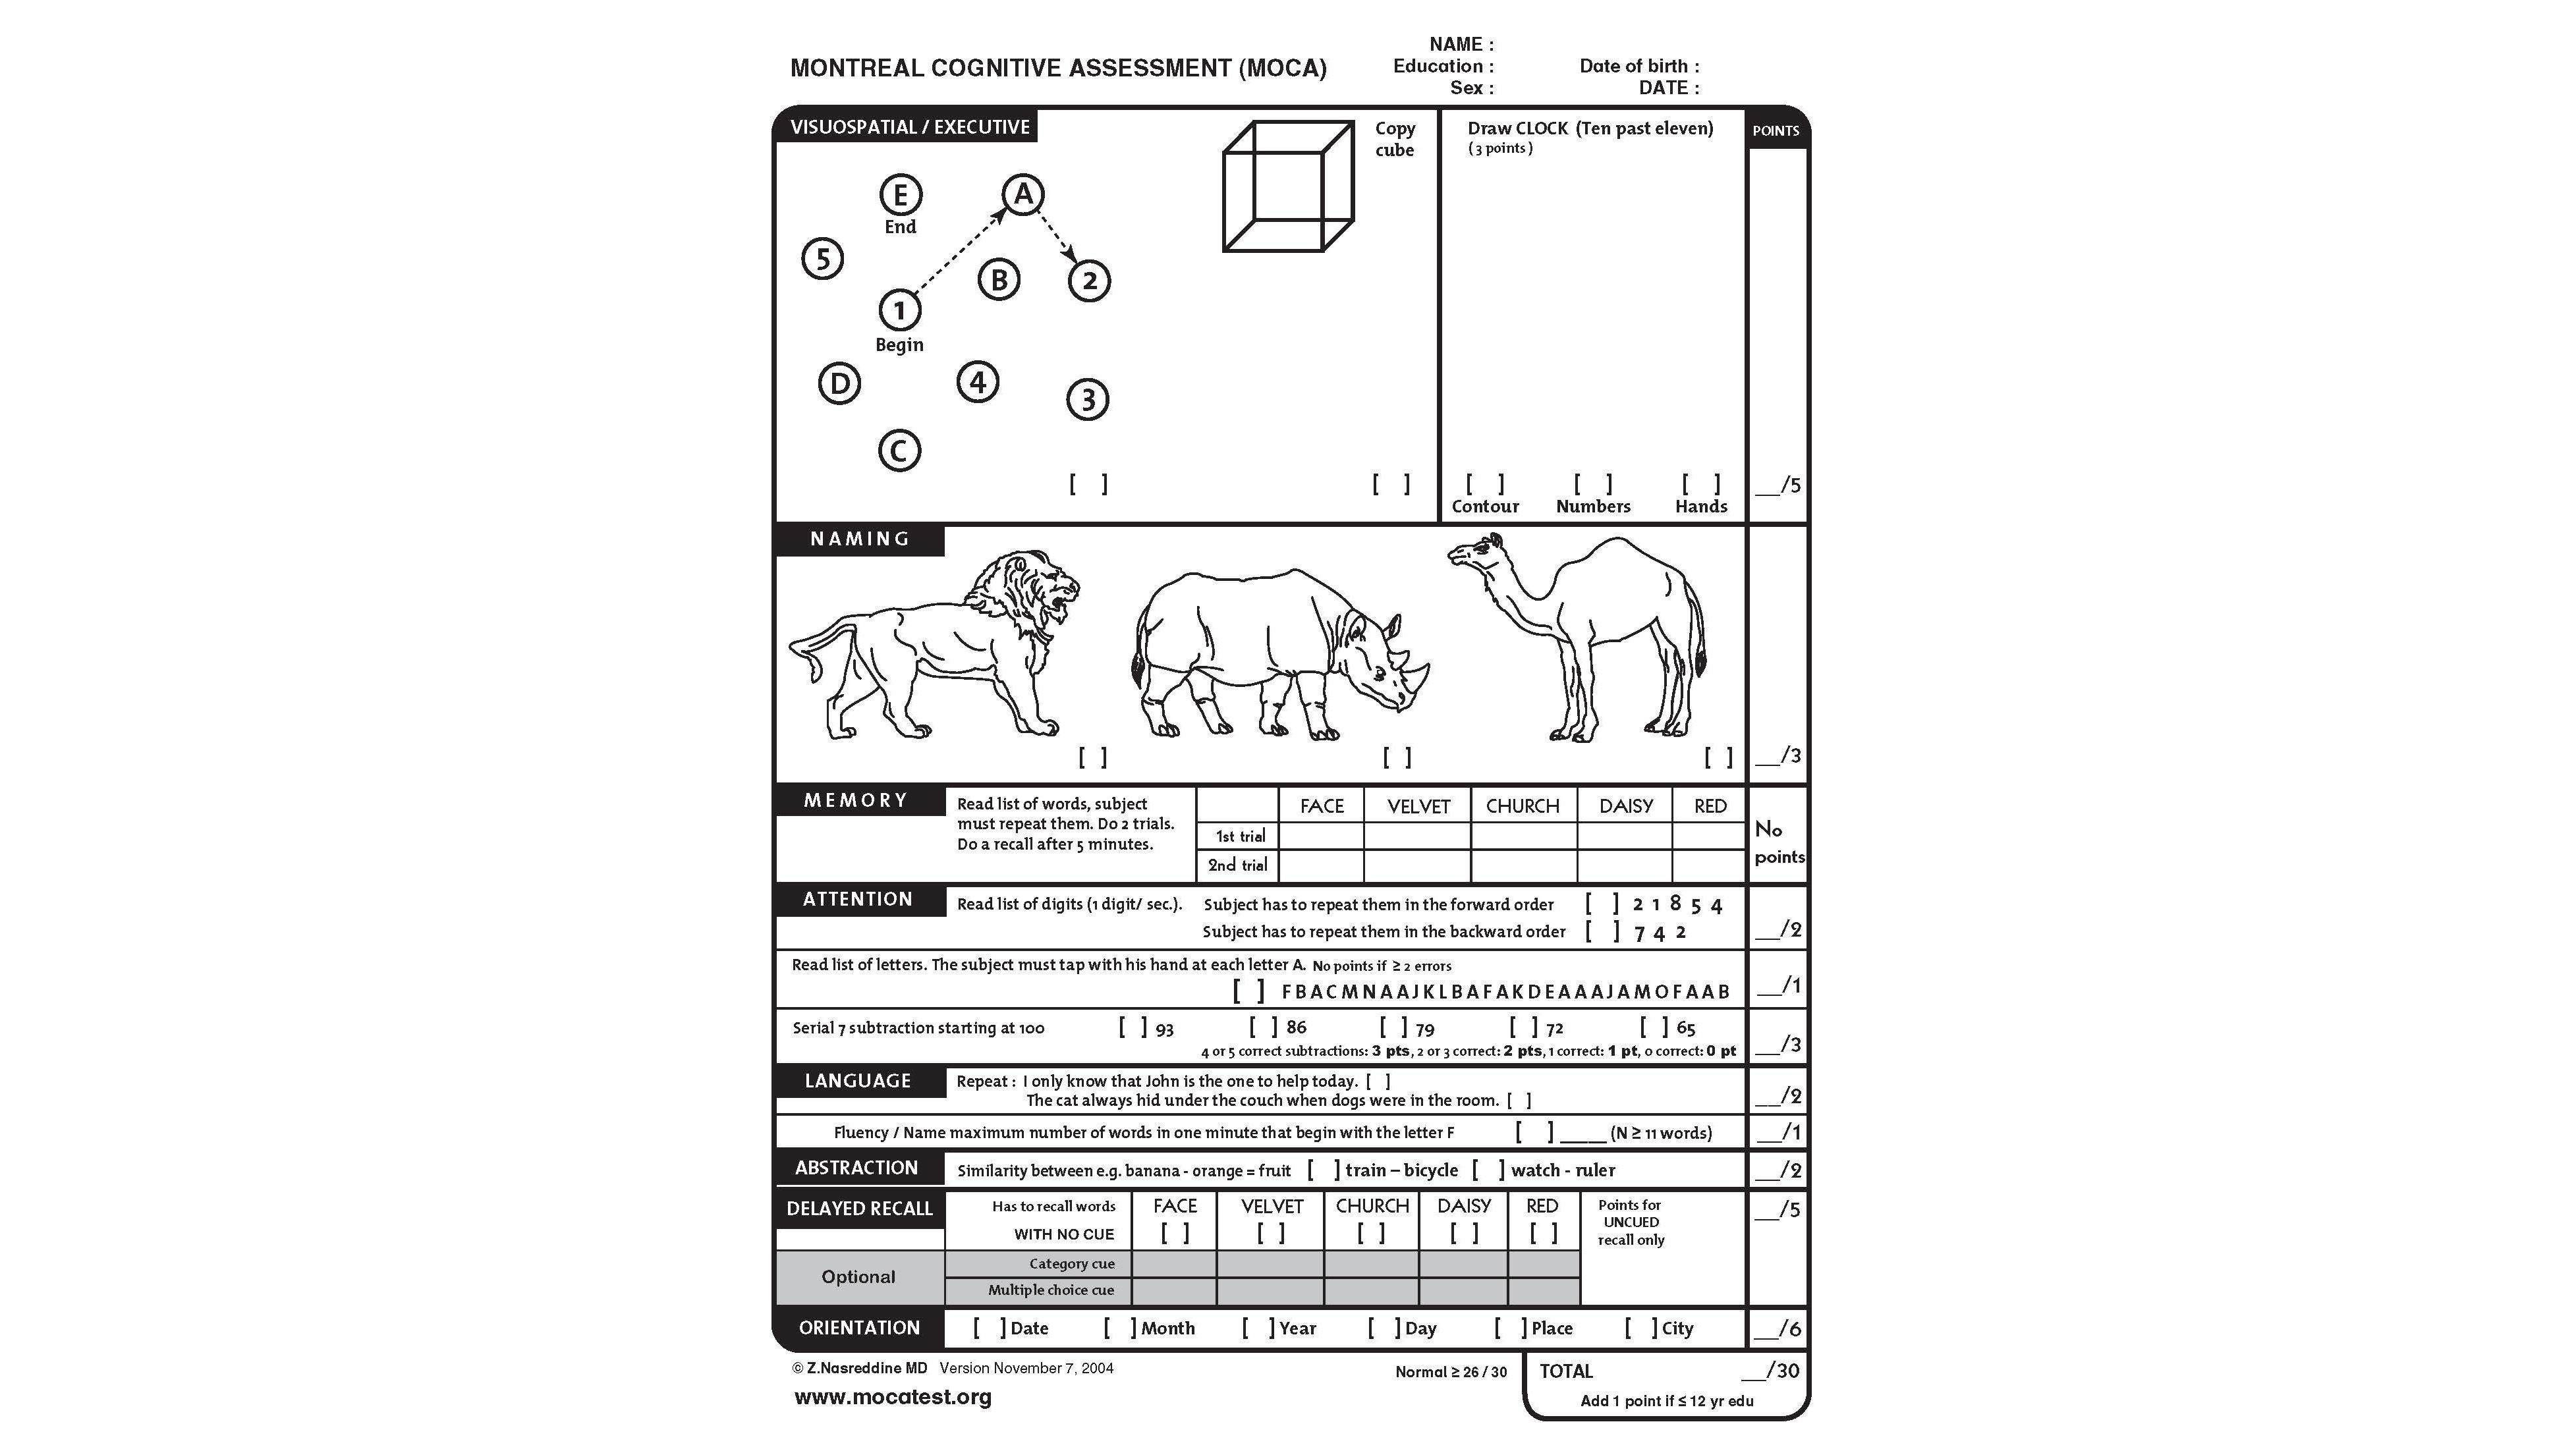 Montreal Cognitive Assessment: What know | CNN